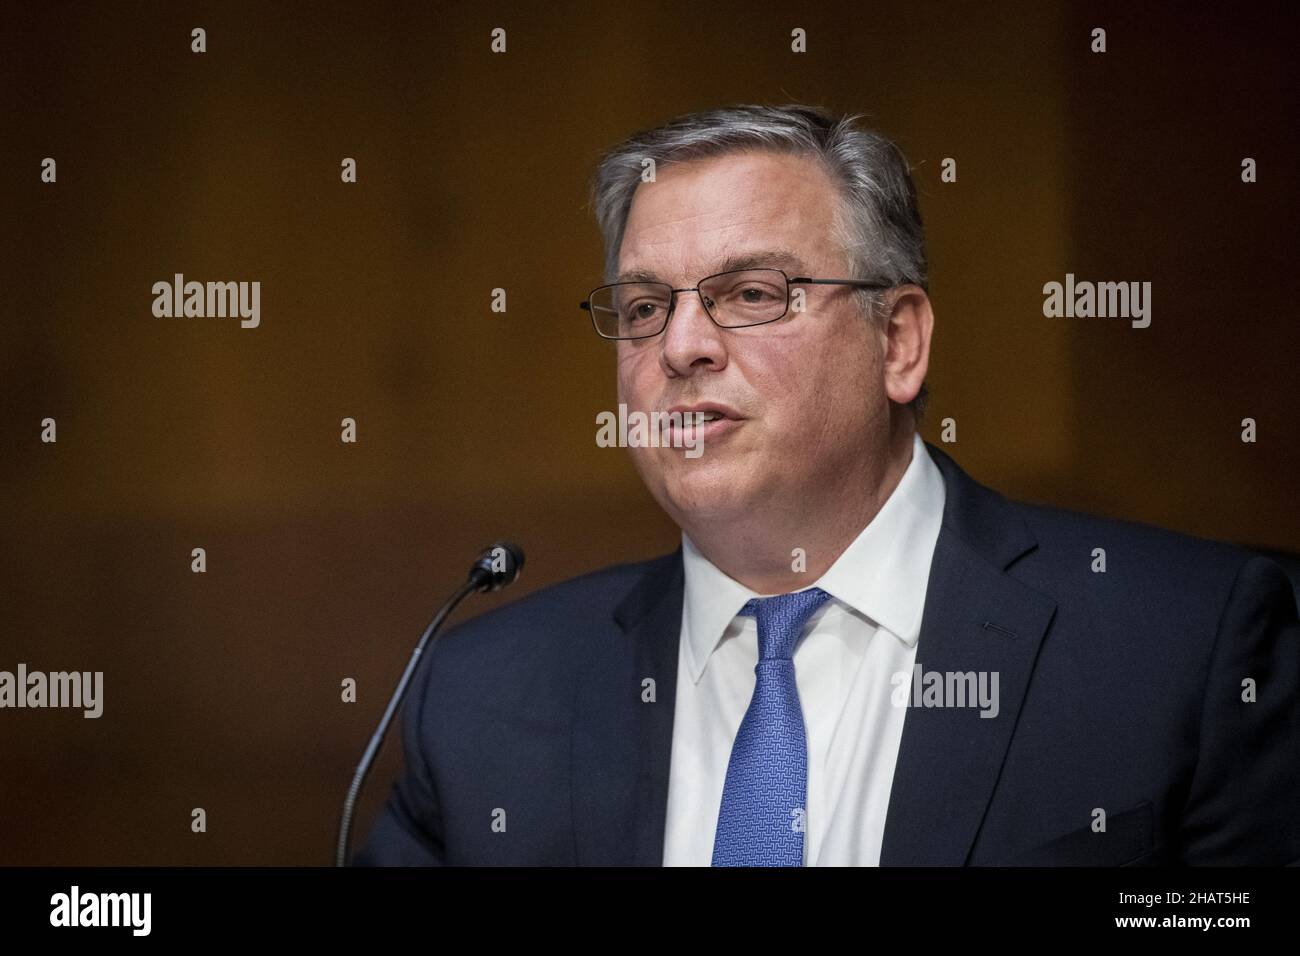 Donald Armin Blome appears before a Senate Committee on Foreign Relations hearing for his nomination to be Ambassador to the Islamic Republic of Pakistan, in the Dirksen Senate Office Building in Washington, DC, USA, Tuesday, December 14, 2021. Photo by Rod Lamkey/CNP/ABACAPRESS.COM Stock Photo